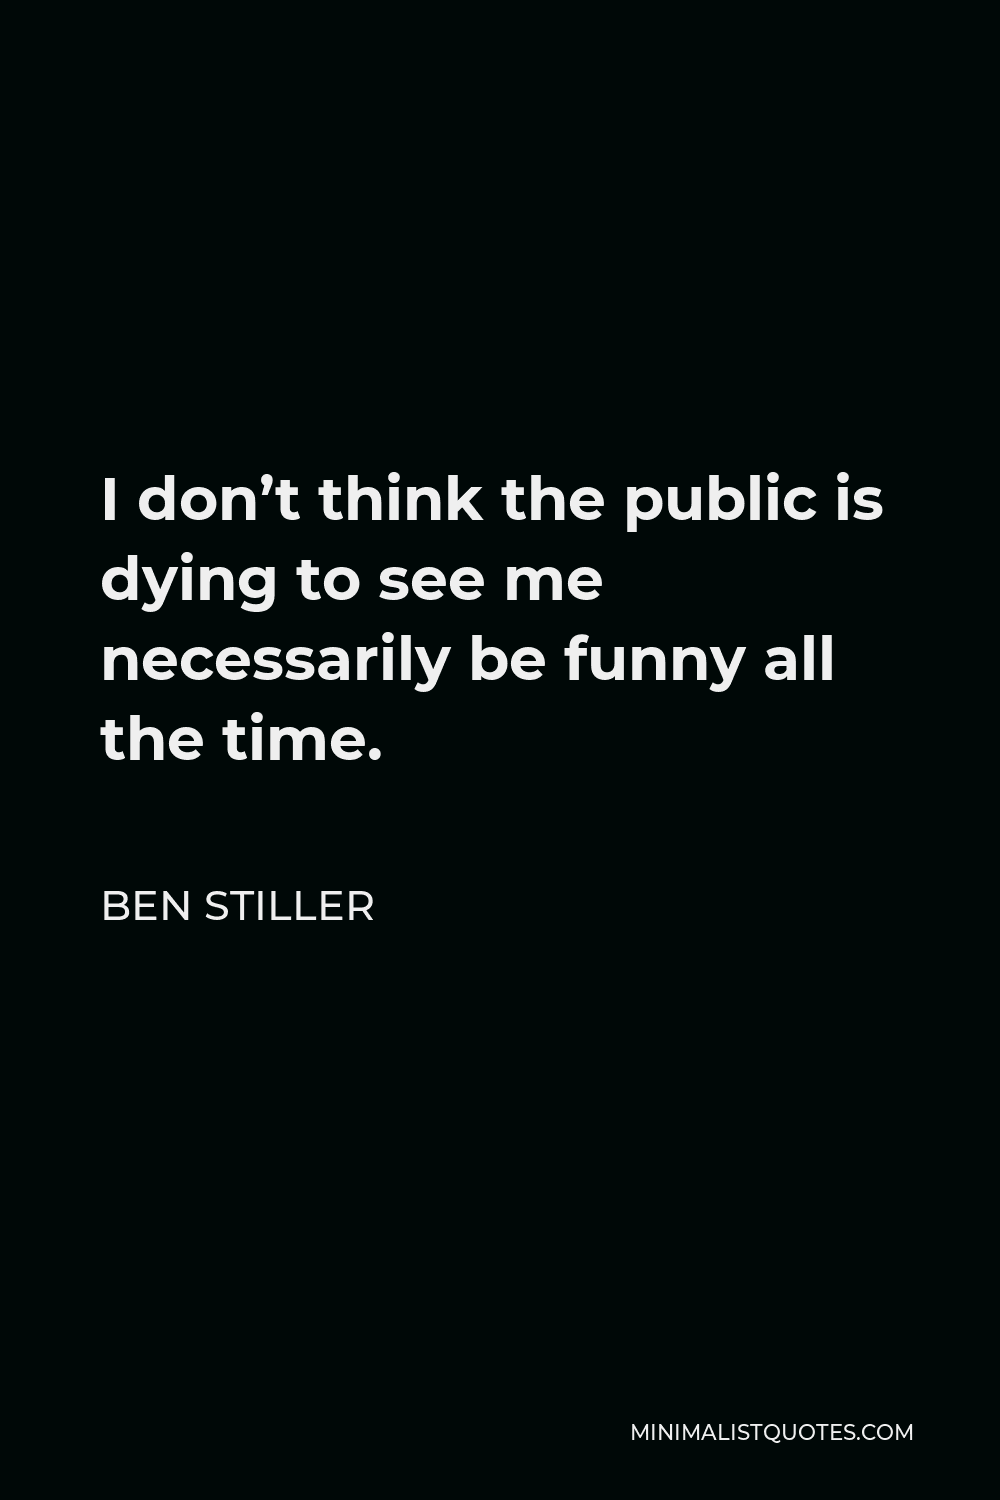 Ben Stiller Quote - I don’t think the public is dying to see me necessarily be funny all the time.